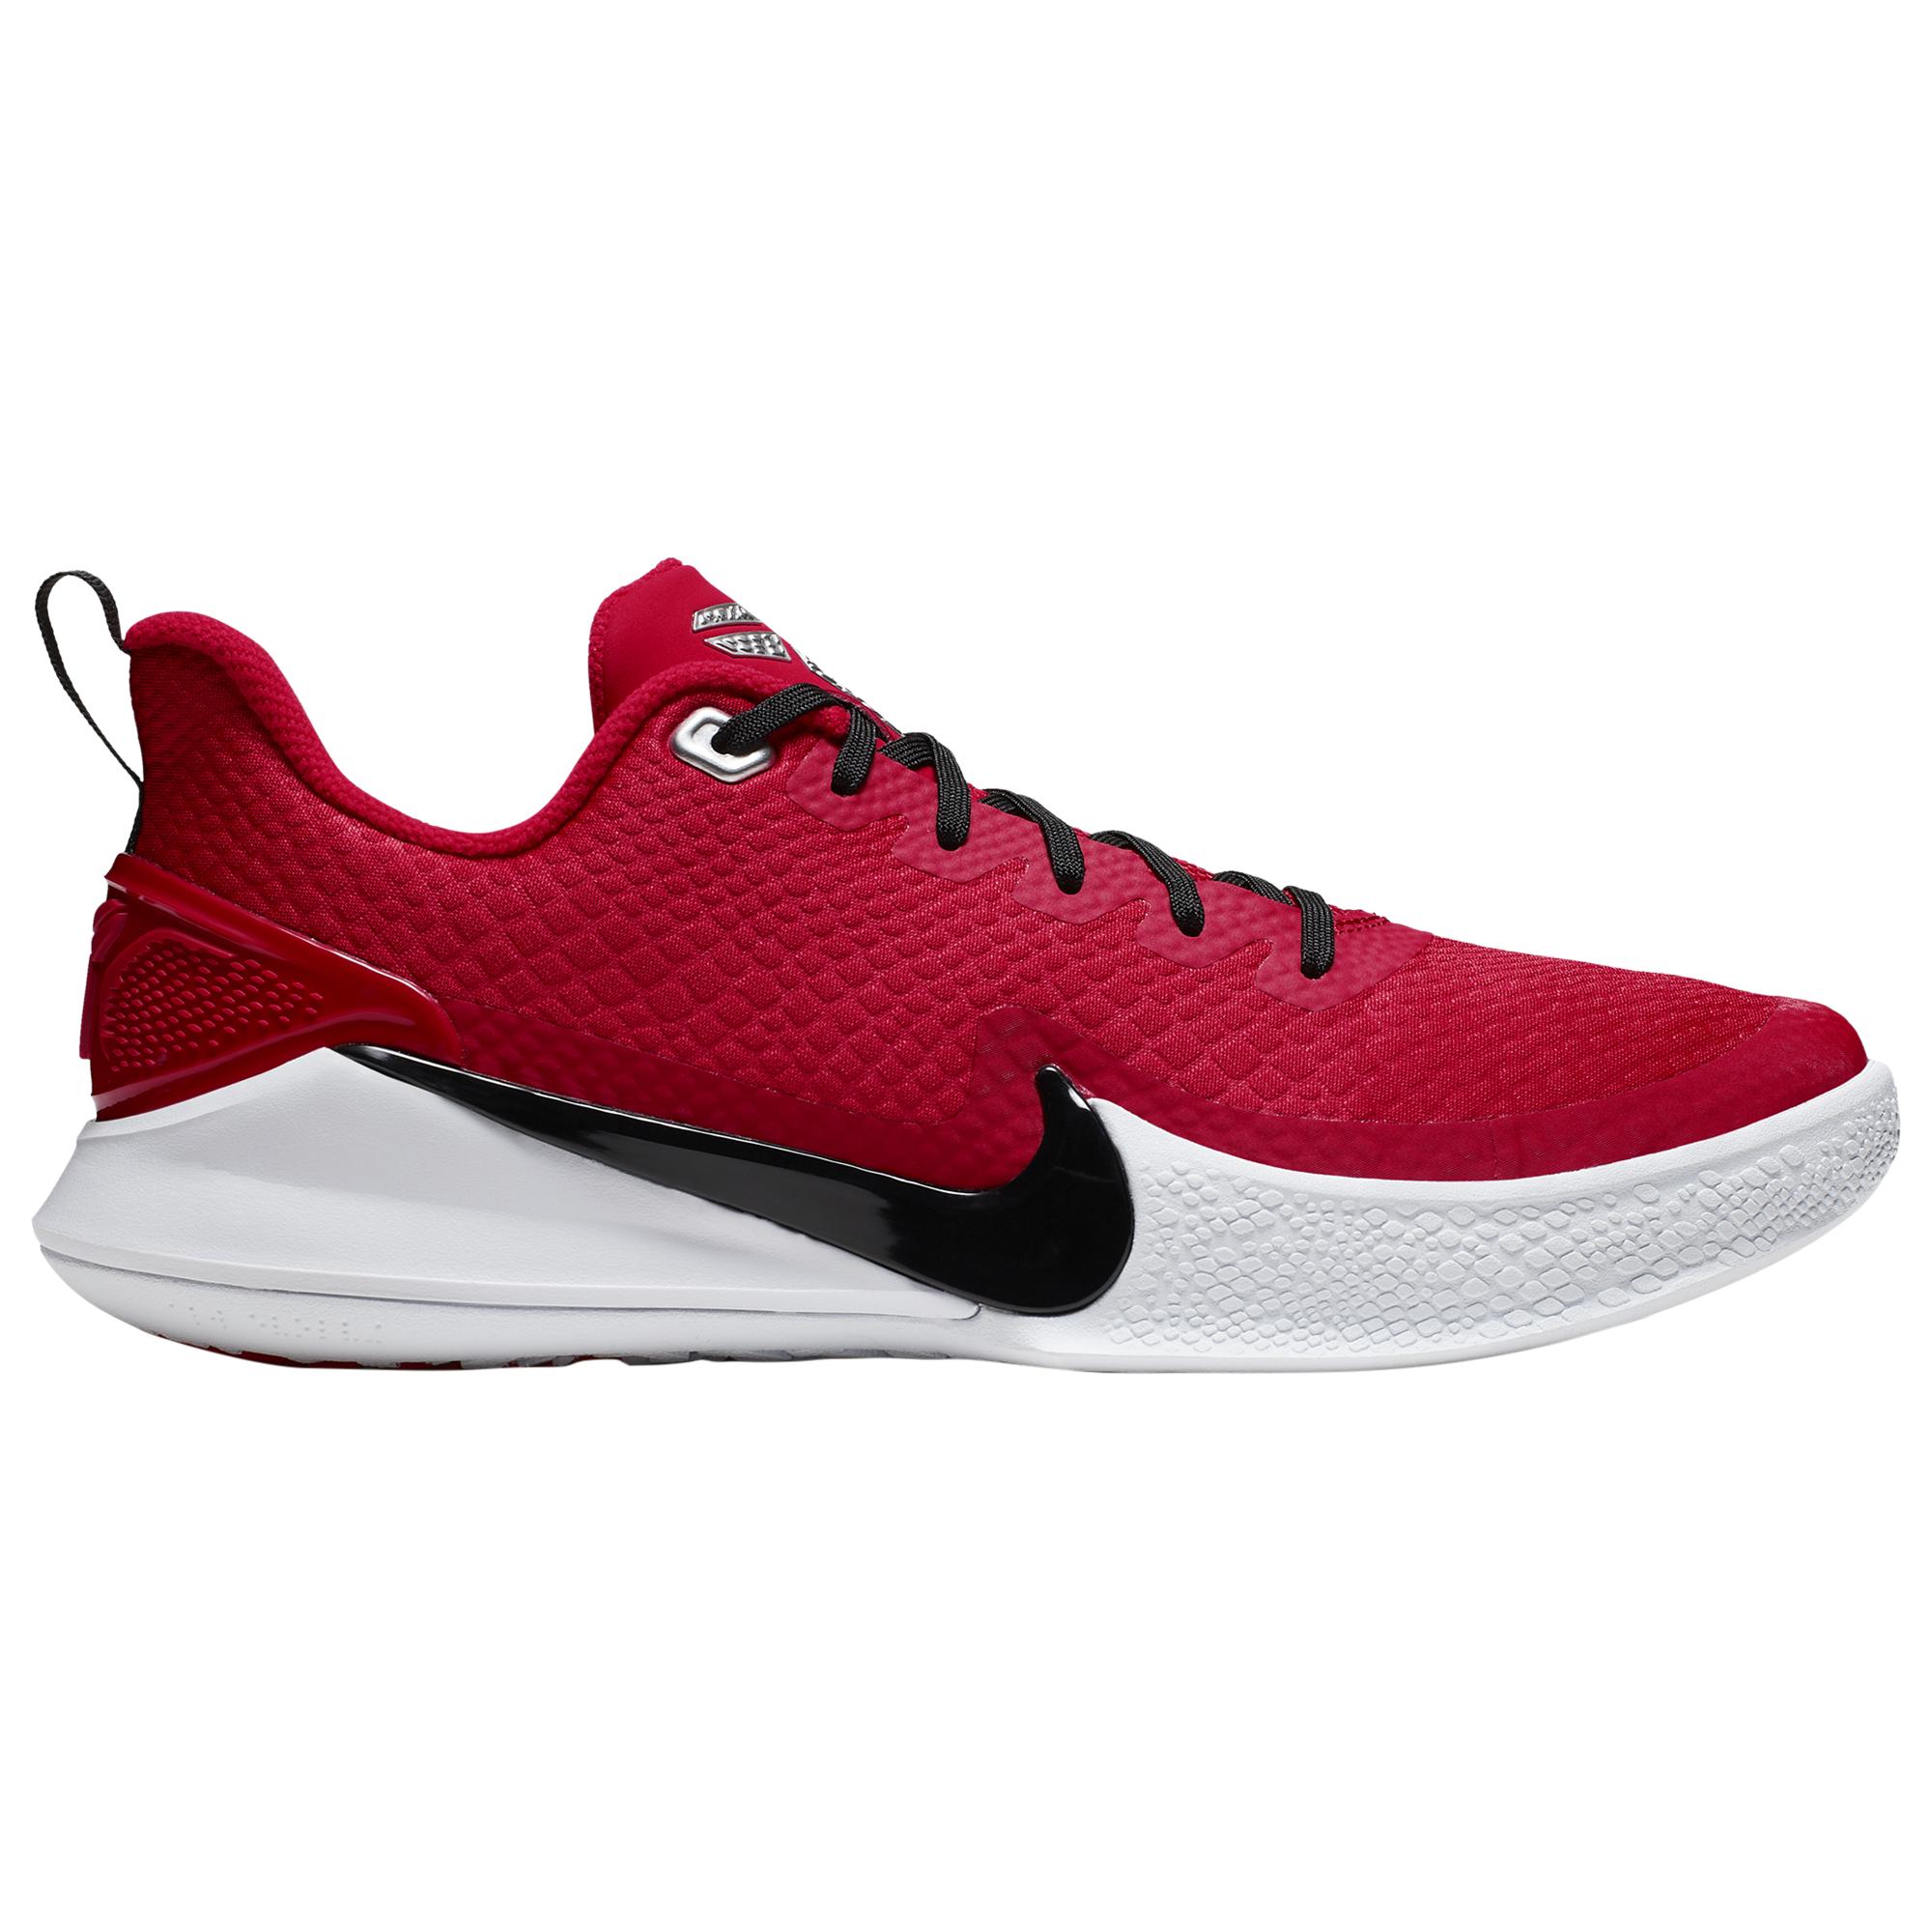 black mamba shoes red